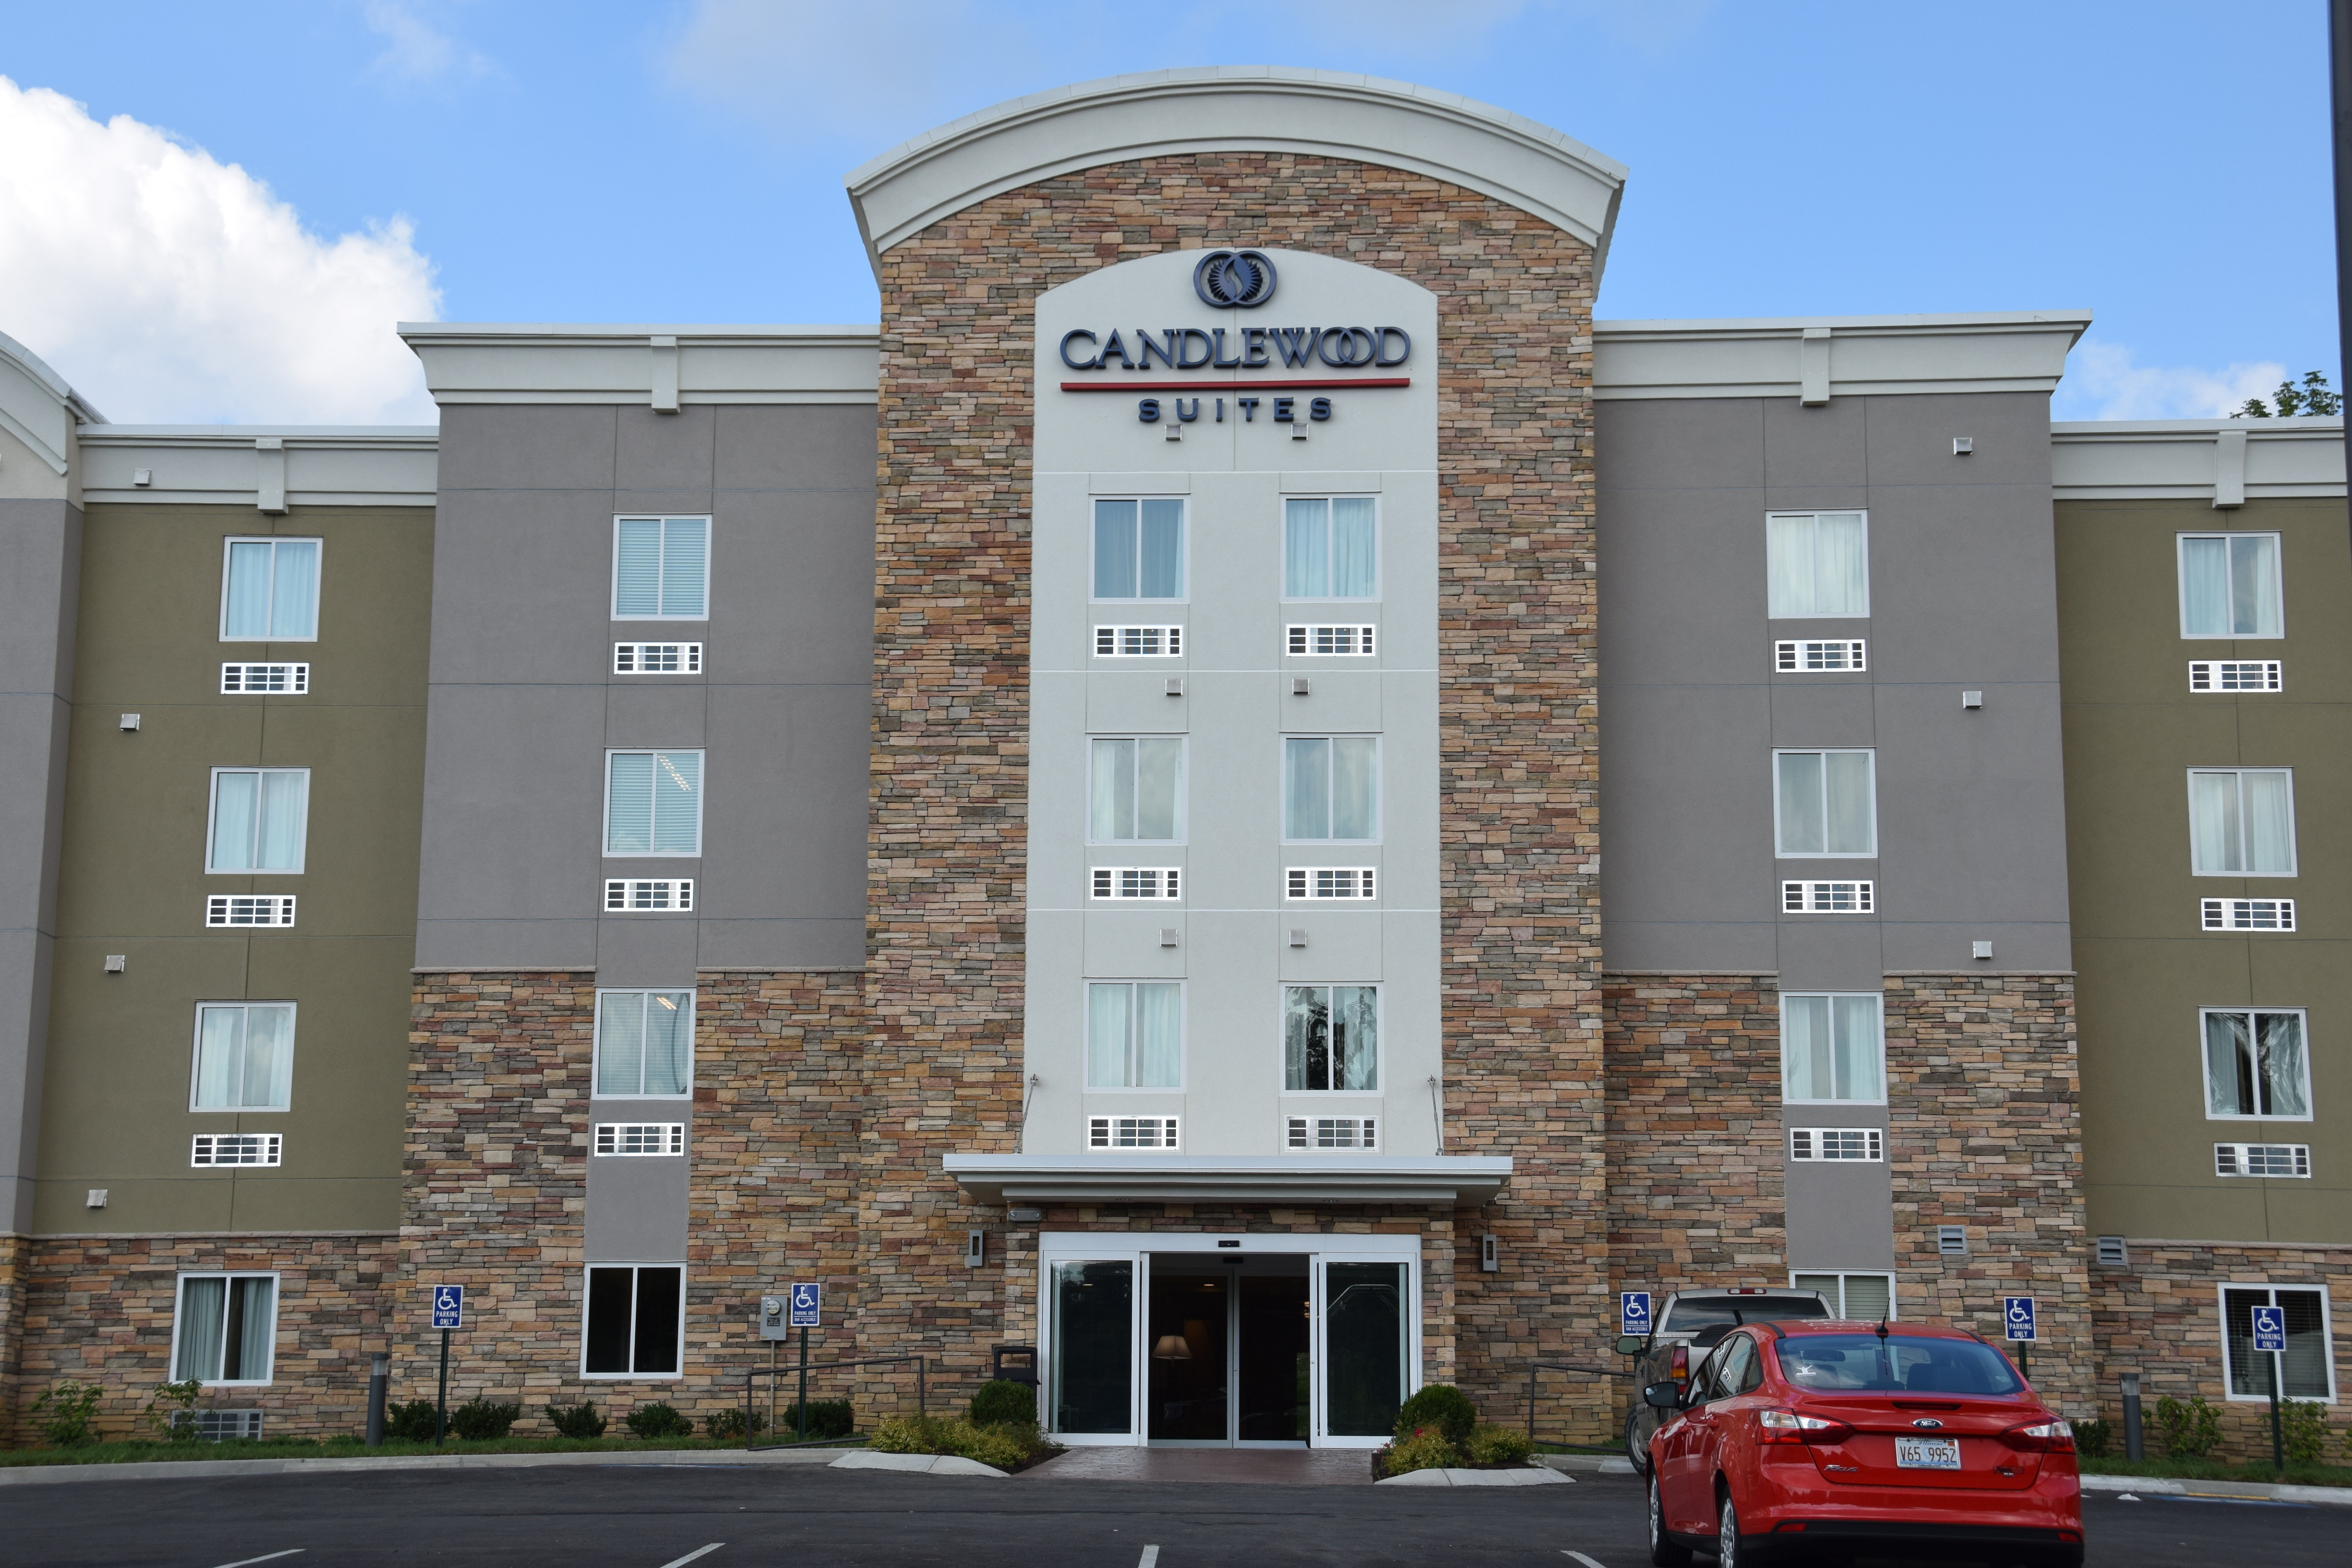 Candlewood Suites Goodlettsville